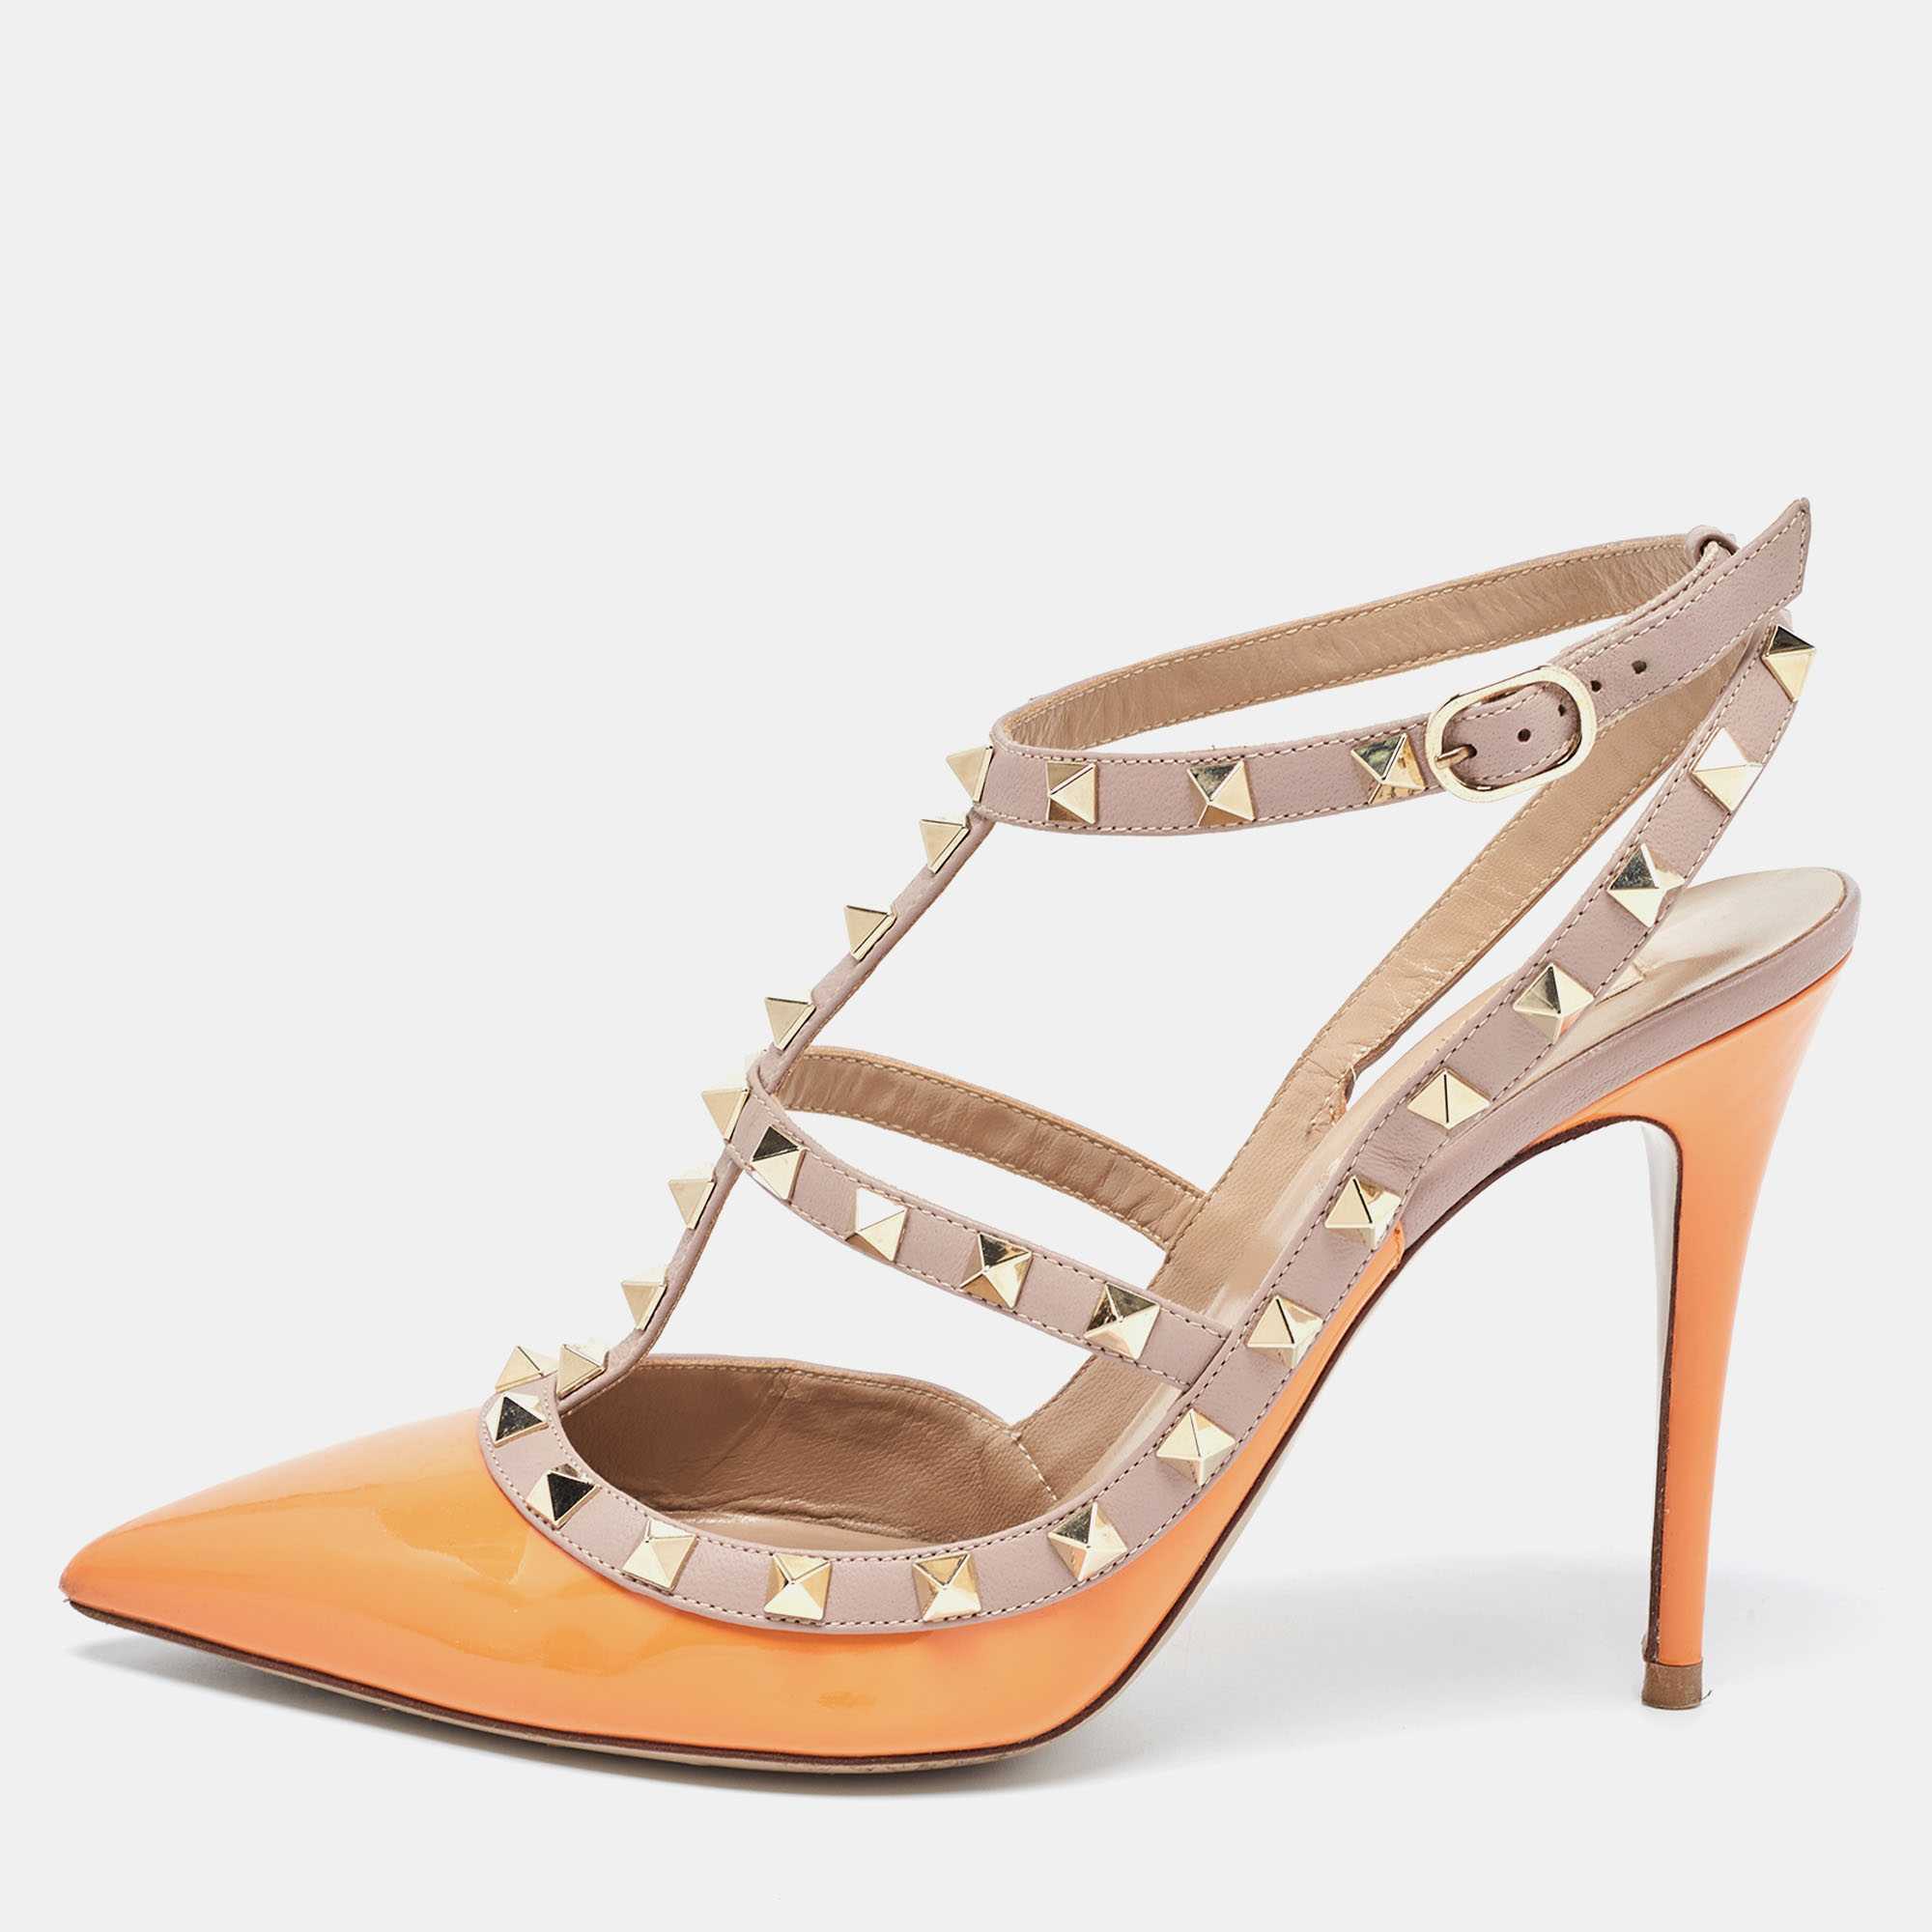 Valentino Orange Patent Leather Rockstud Strappy Pointed Toe Pumps Size 40